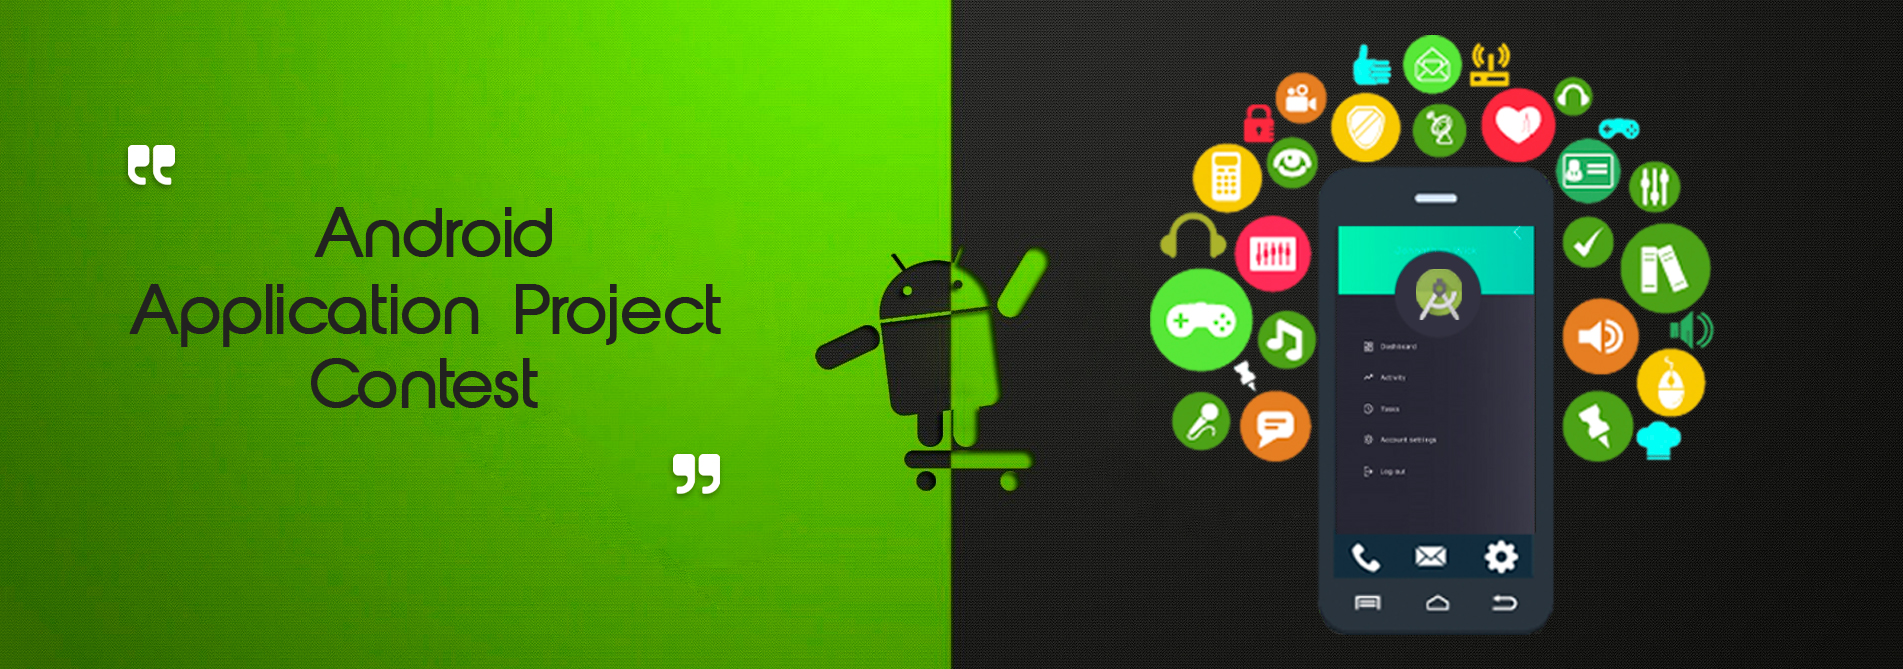 Android Application Project Contest